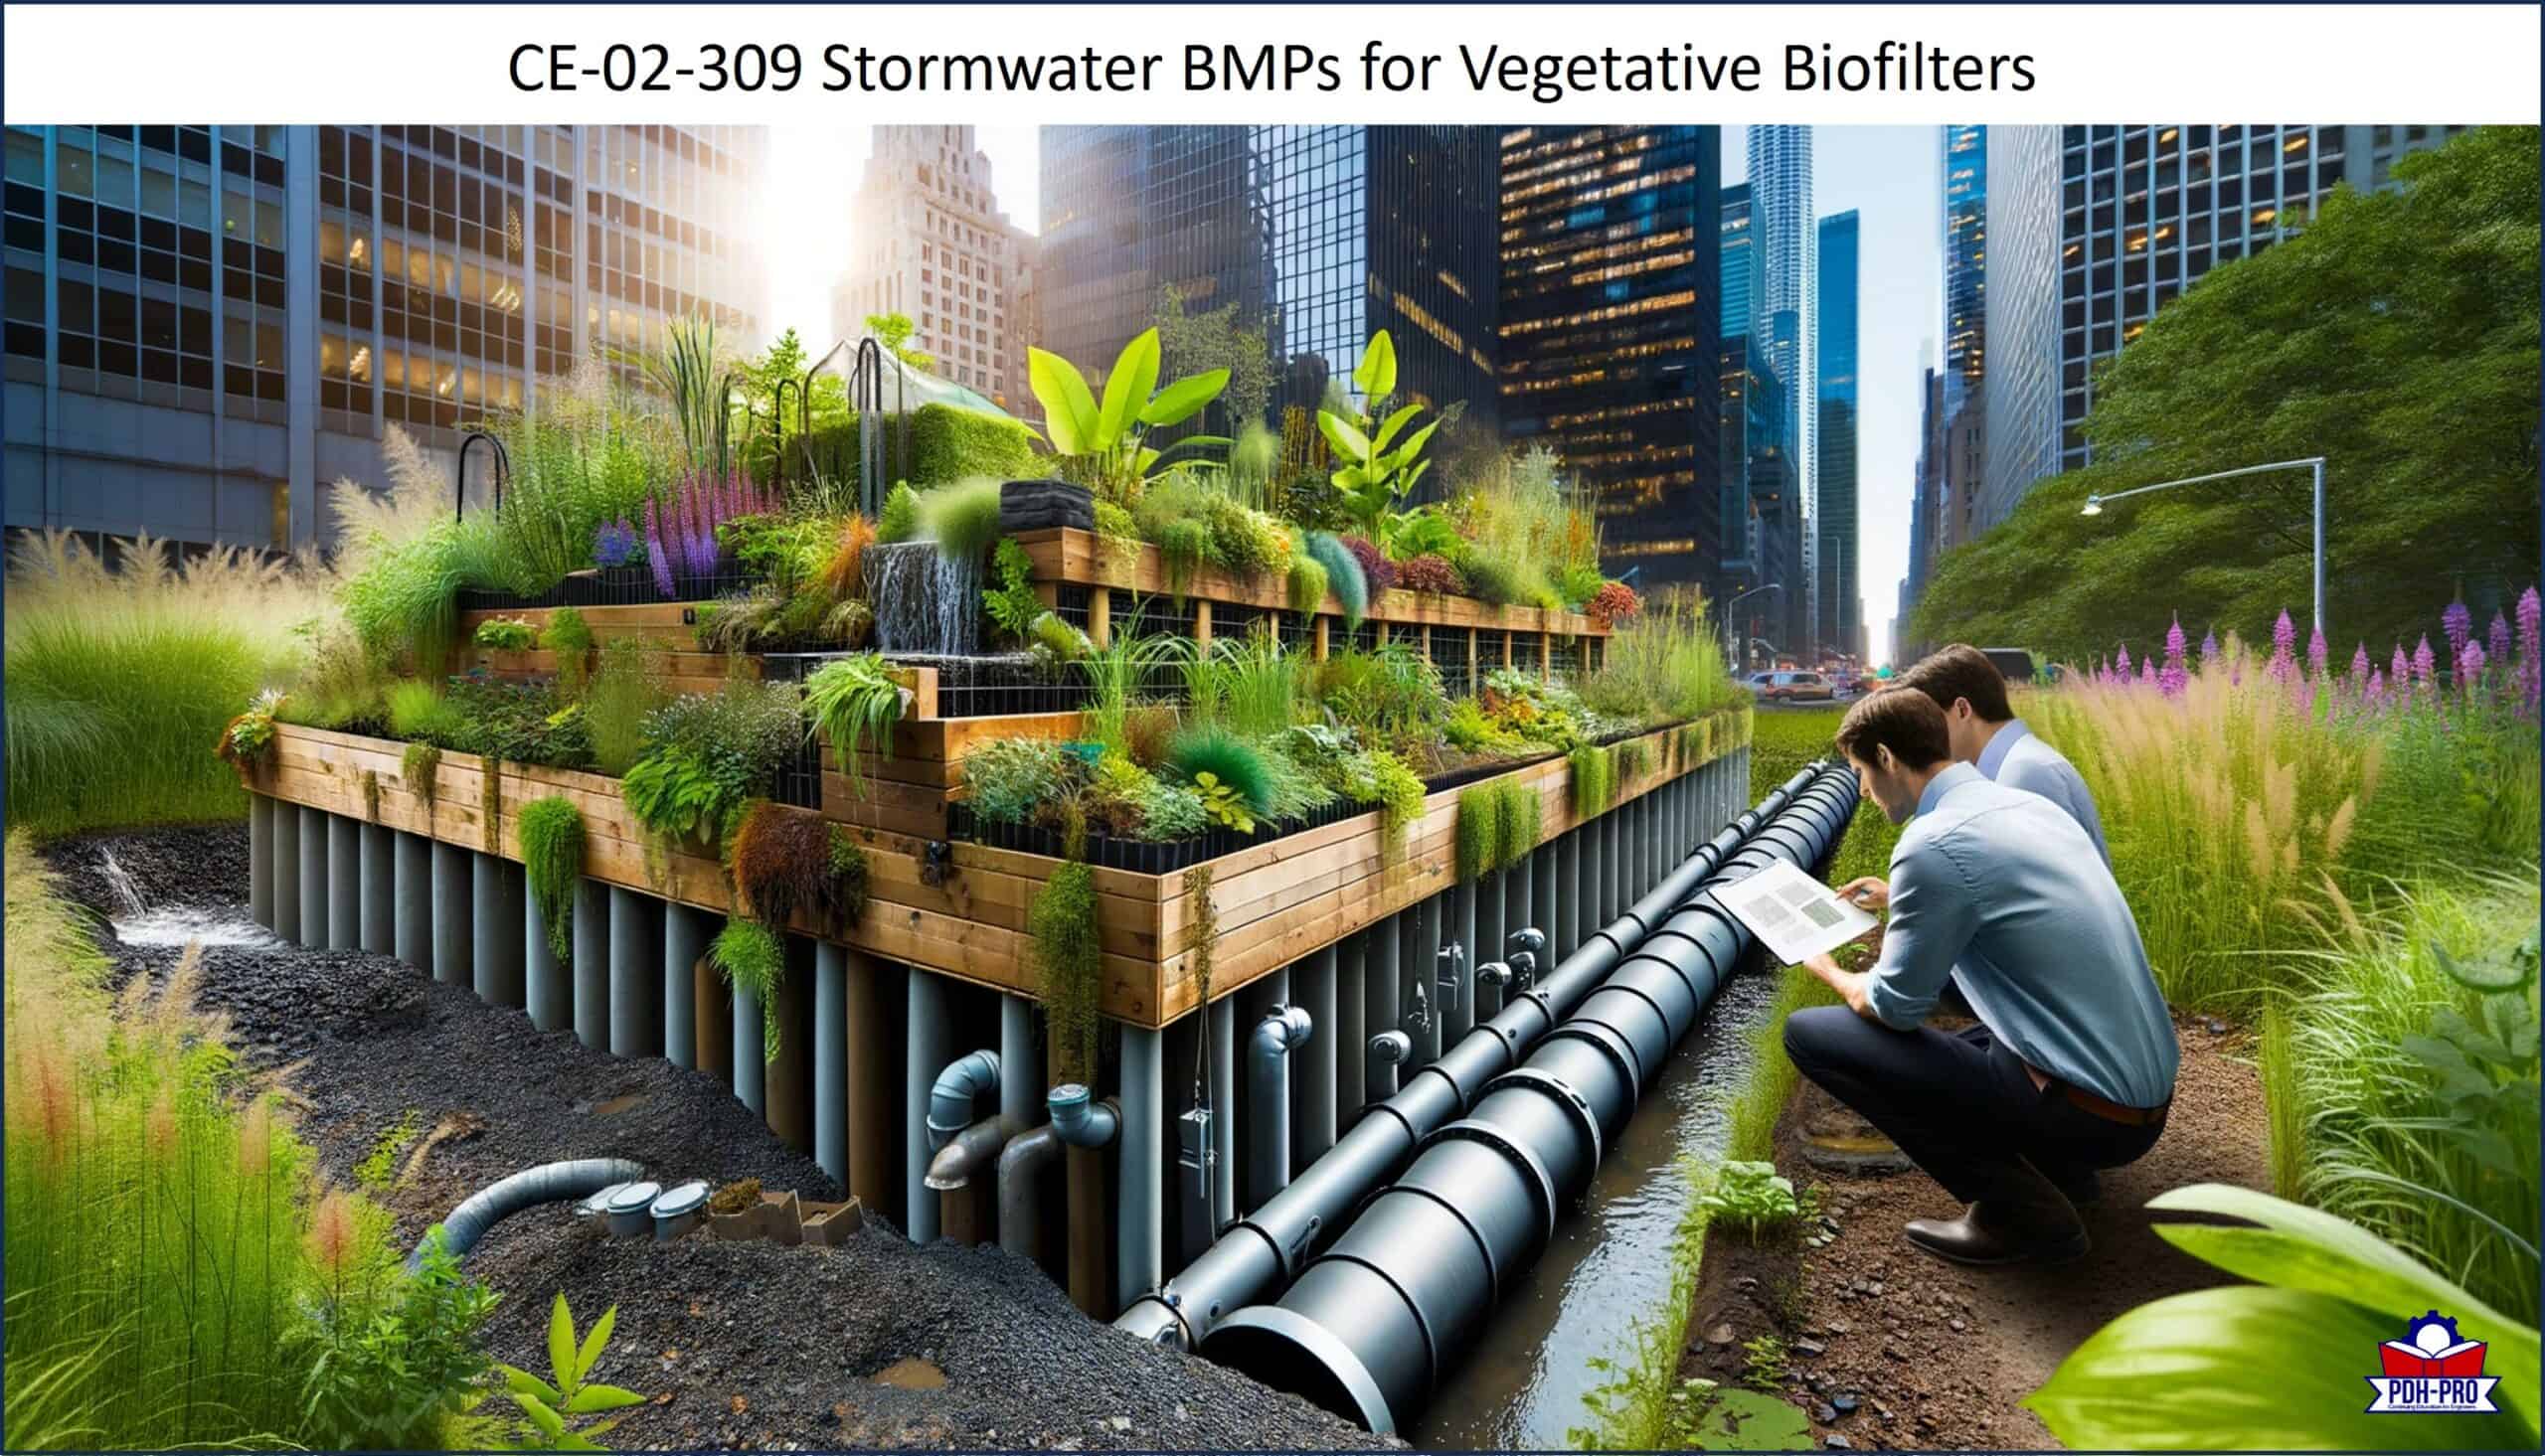 Stormwater BMPs for Vegetative Biofilters